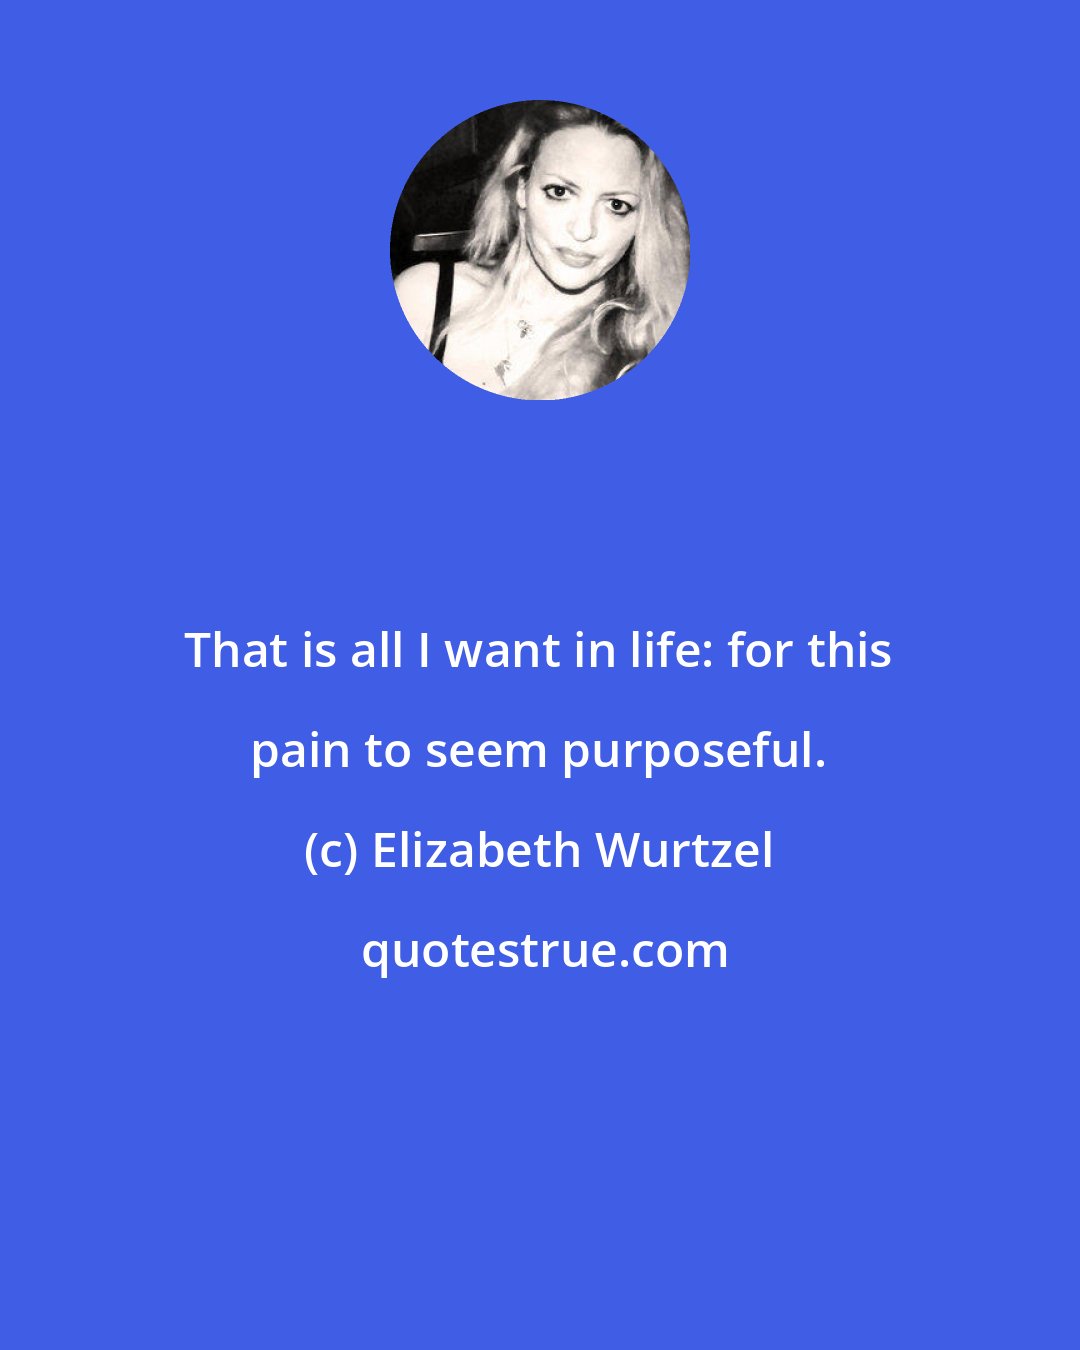 Elizabeth Wurtzel: That is all I want in life: for this pain to seem purposeful.